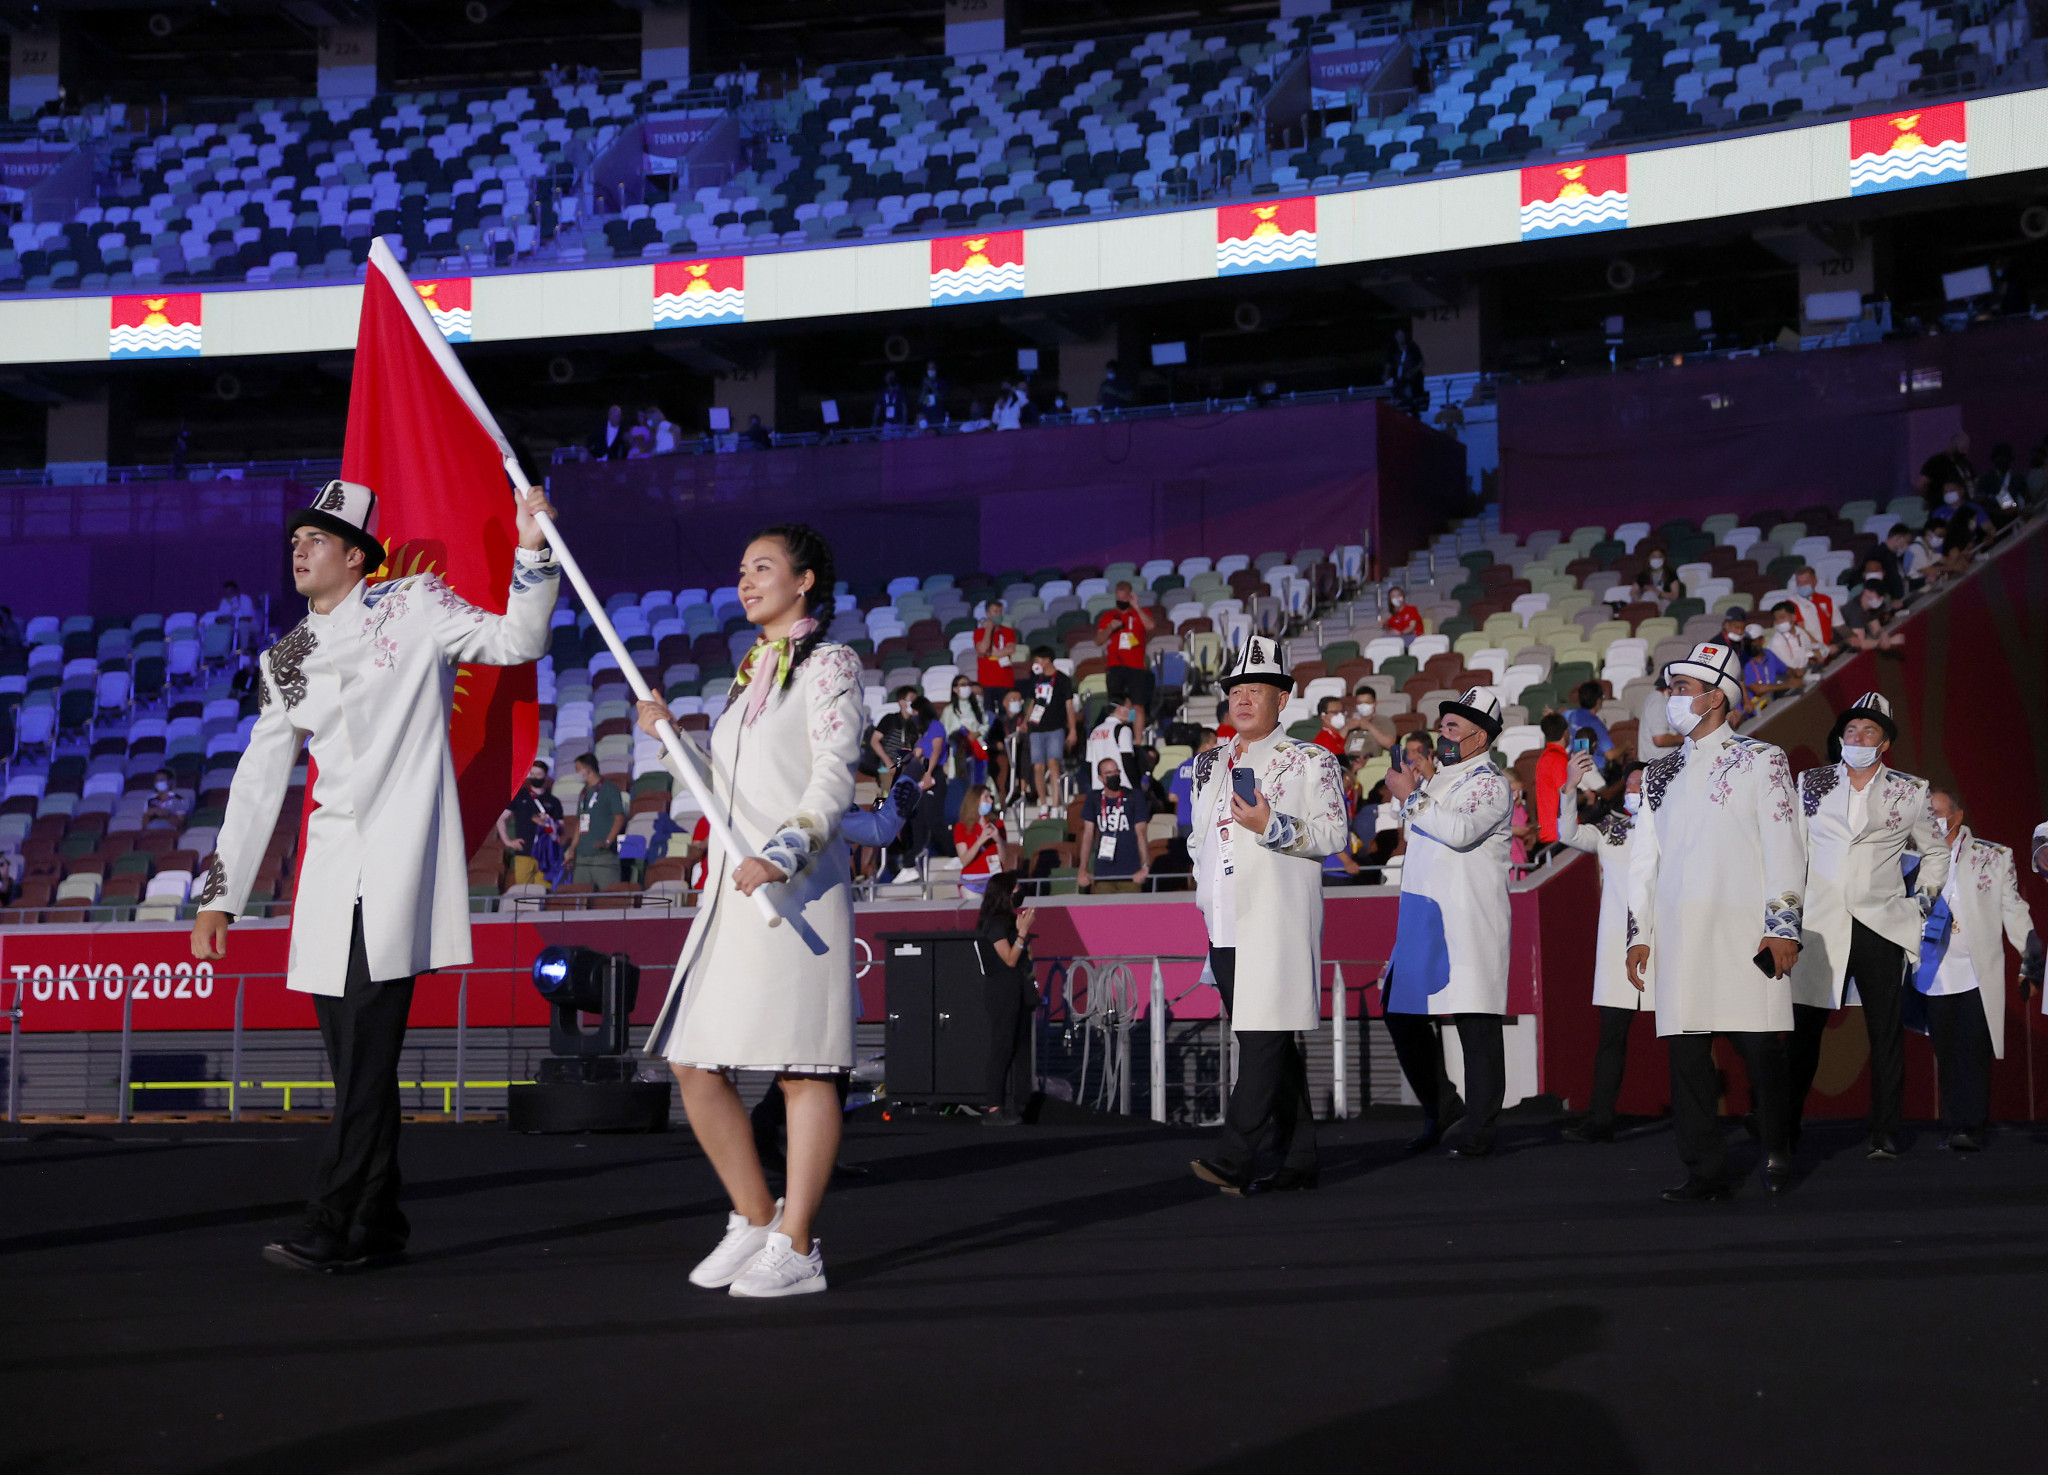 Kyrgyzstan enjoyed its most successful Olympics at Tokyo 2020 ©Getty Images